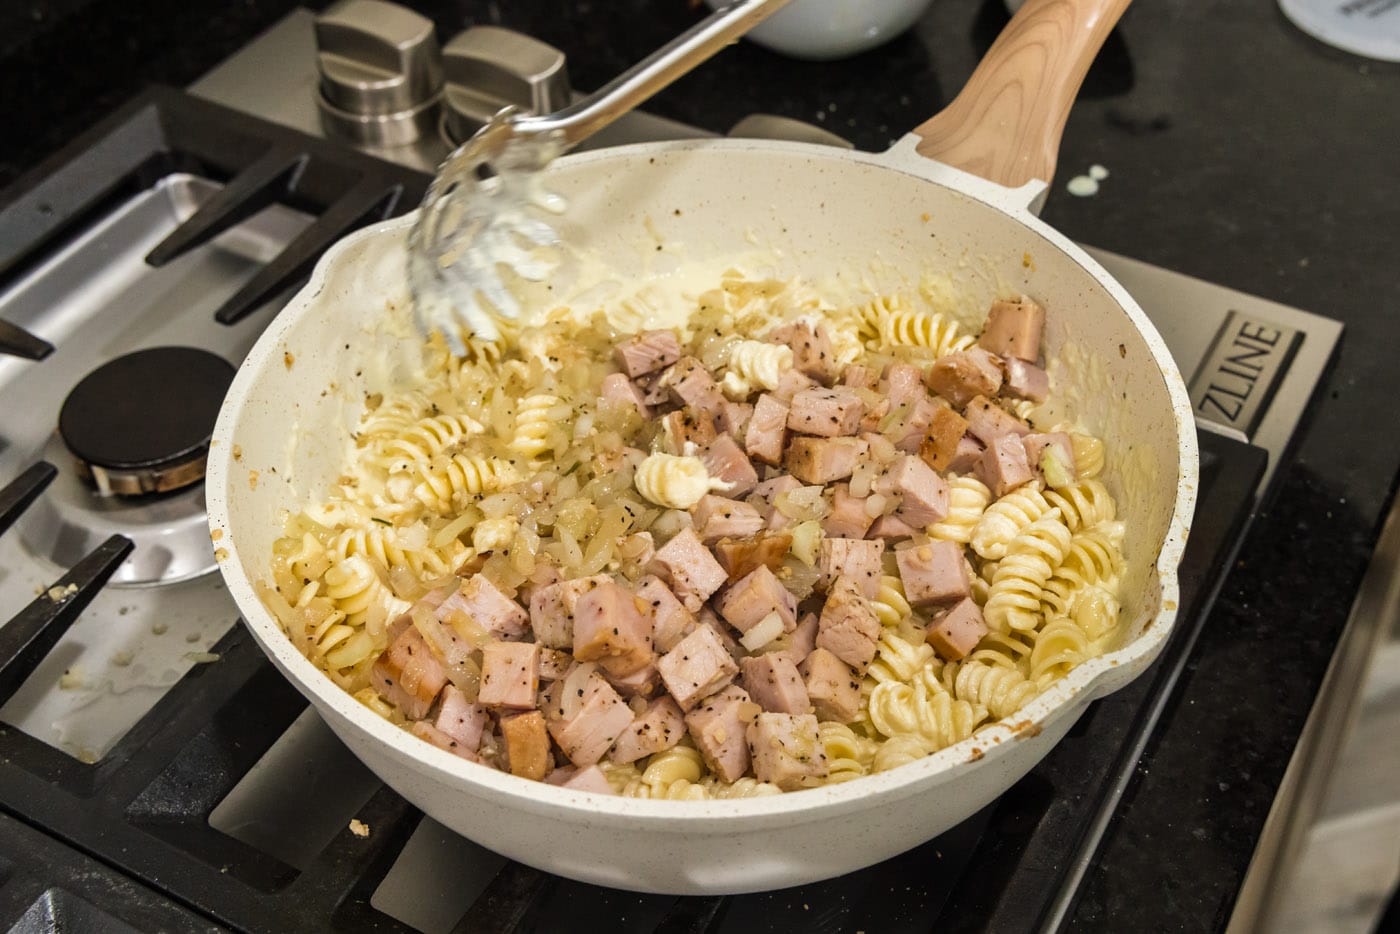 cubed turkey and onion mixture added to skillet with pasta and carbonara sauce